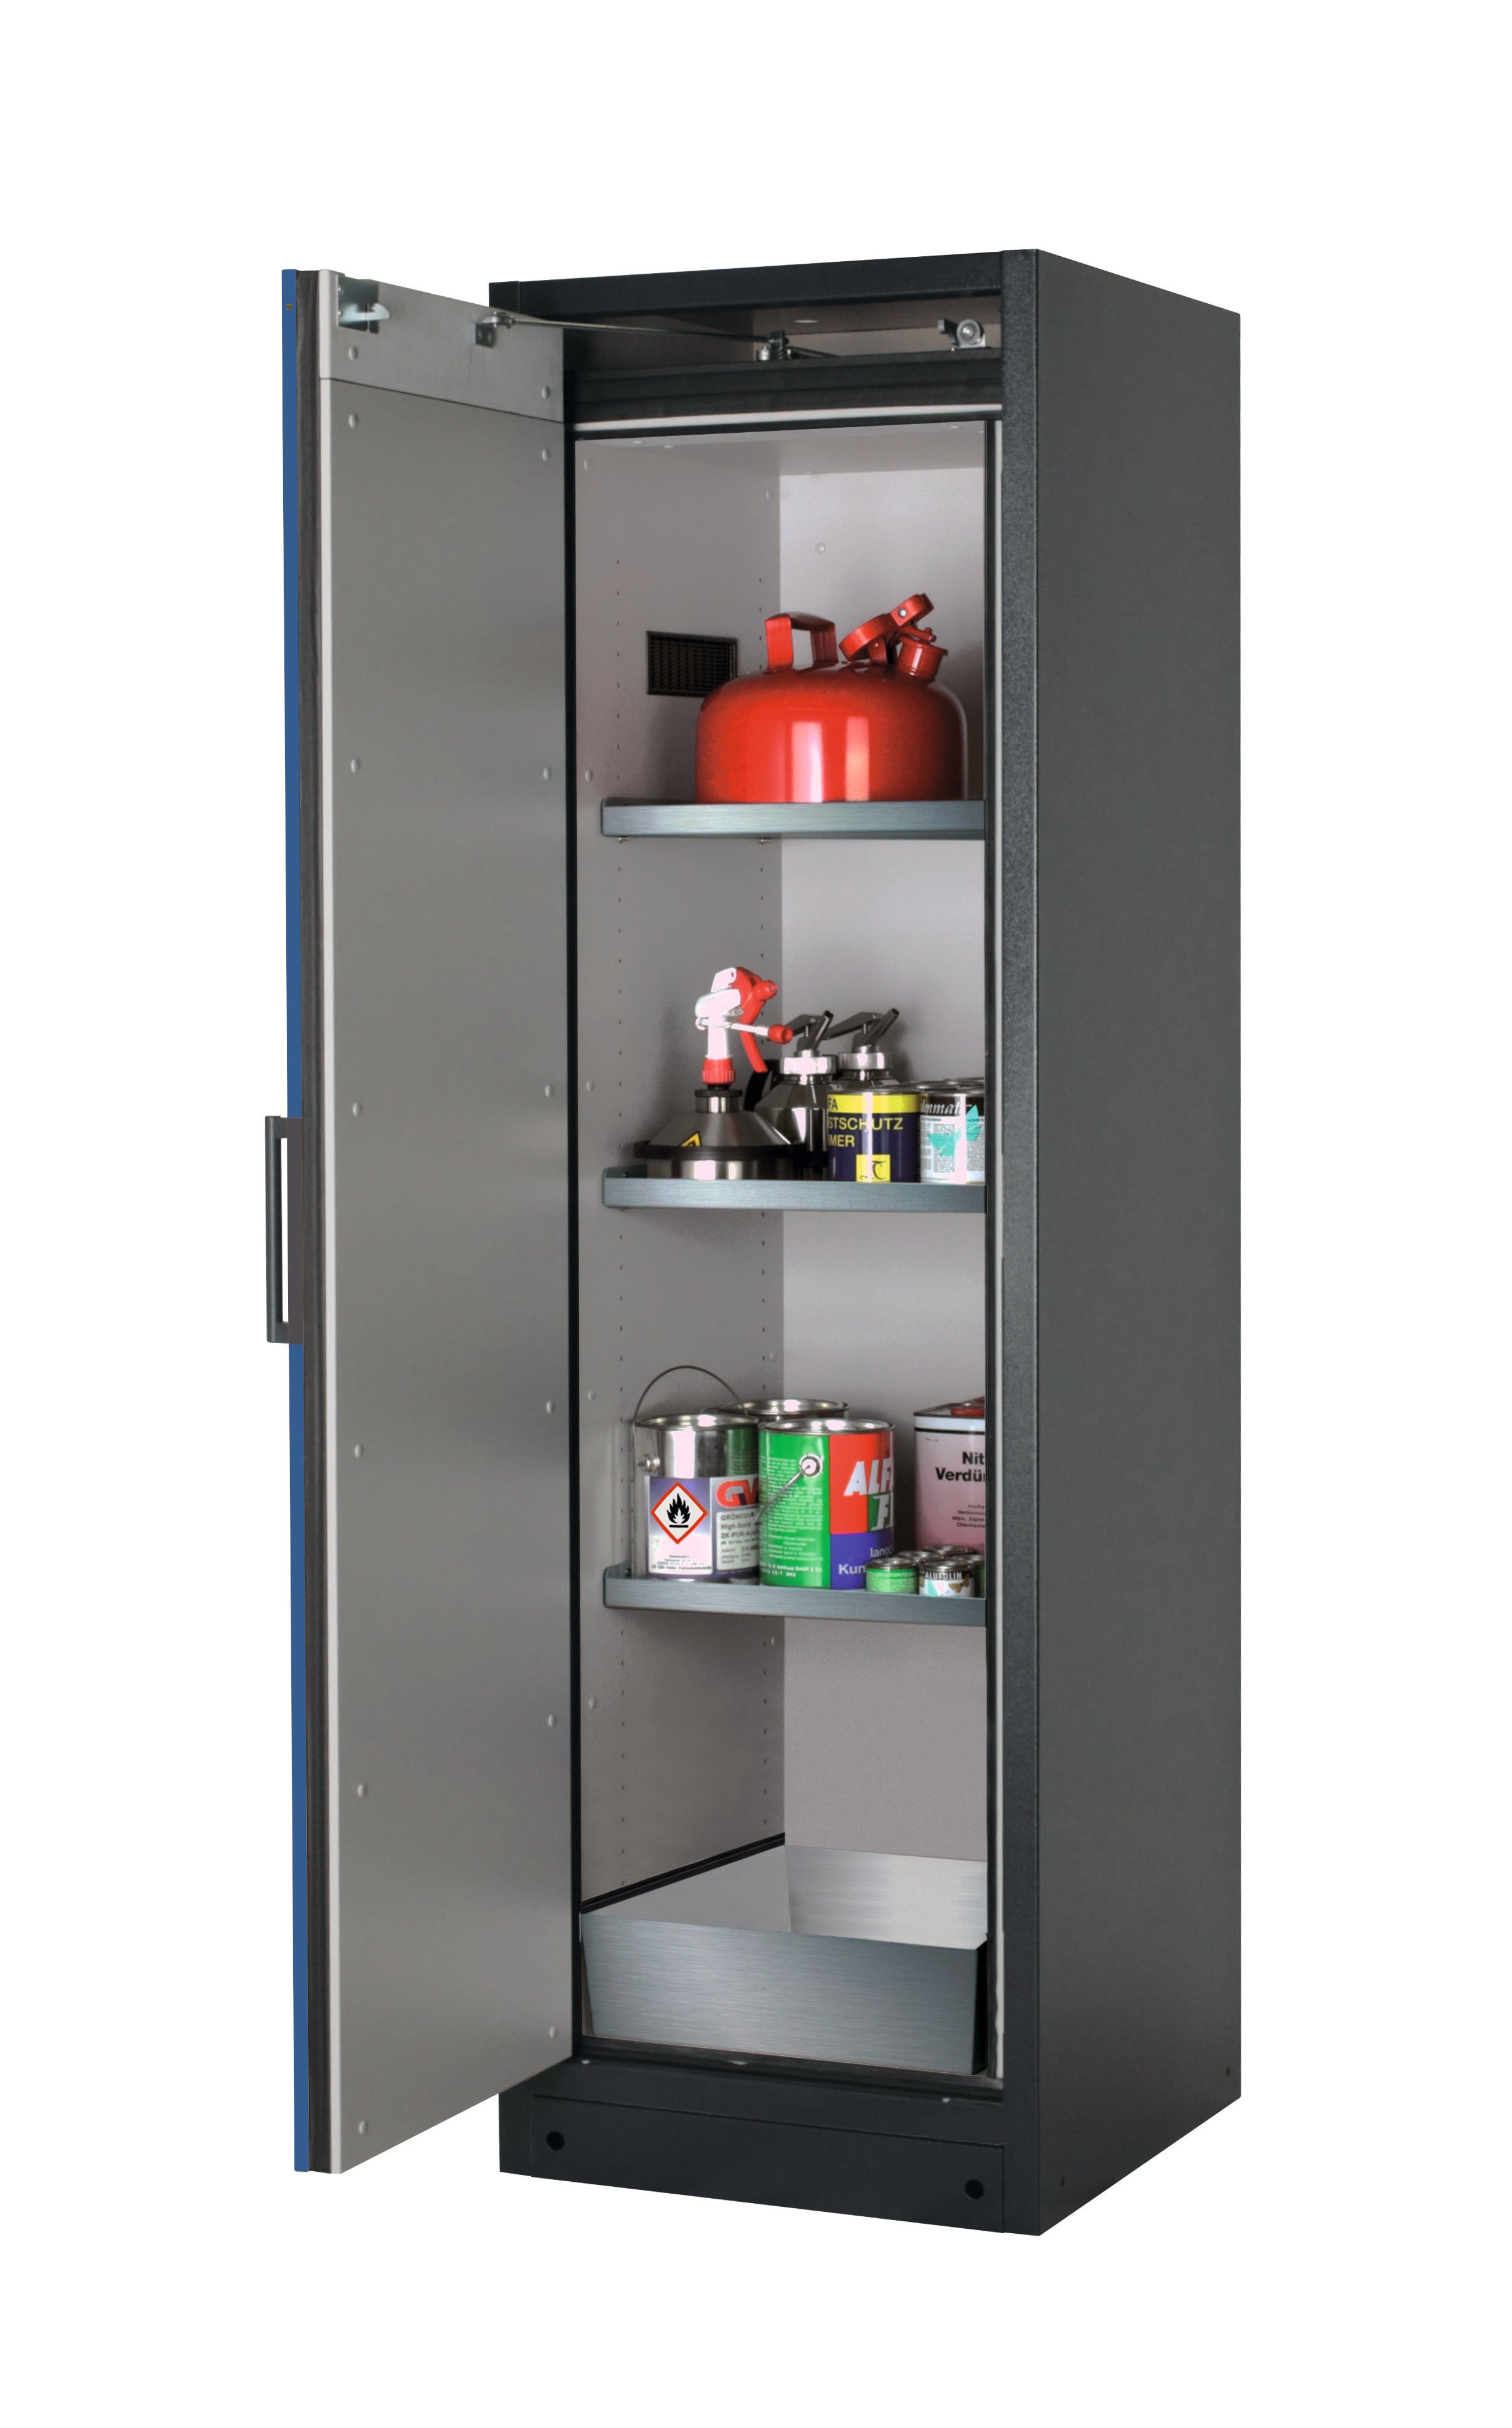 Type 90 safety storage cabinet Q-CLASSIC-90 model Q90.195.060 in gentian blue RAL 5010 with 3x shelf standard (stainless steel 1.4301),